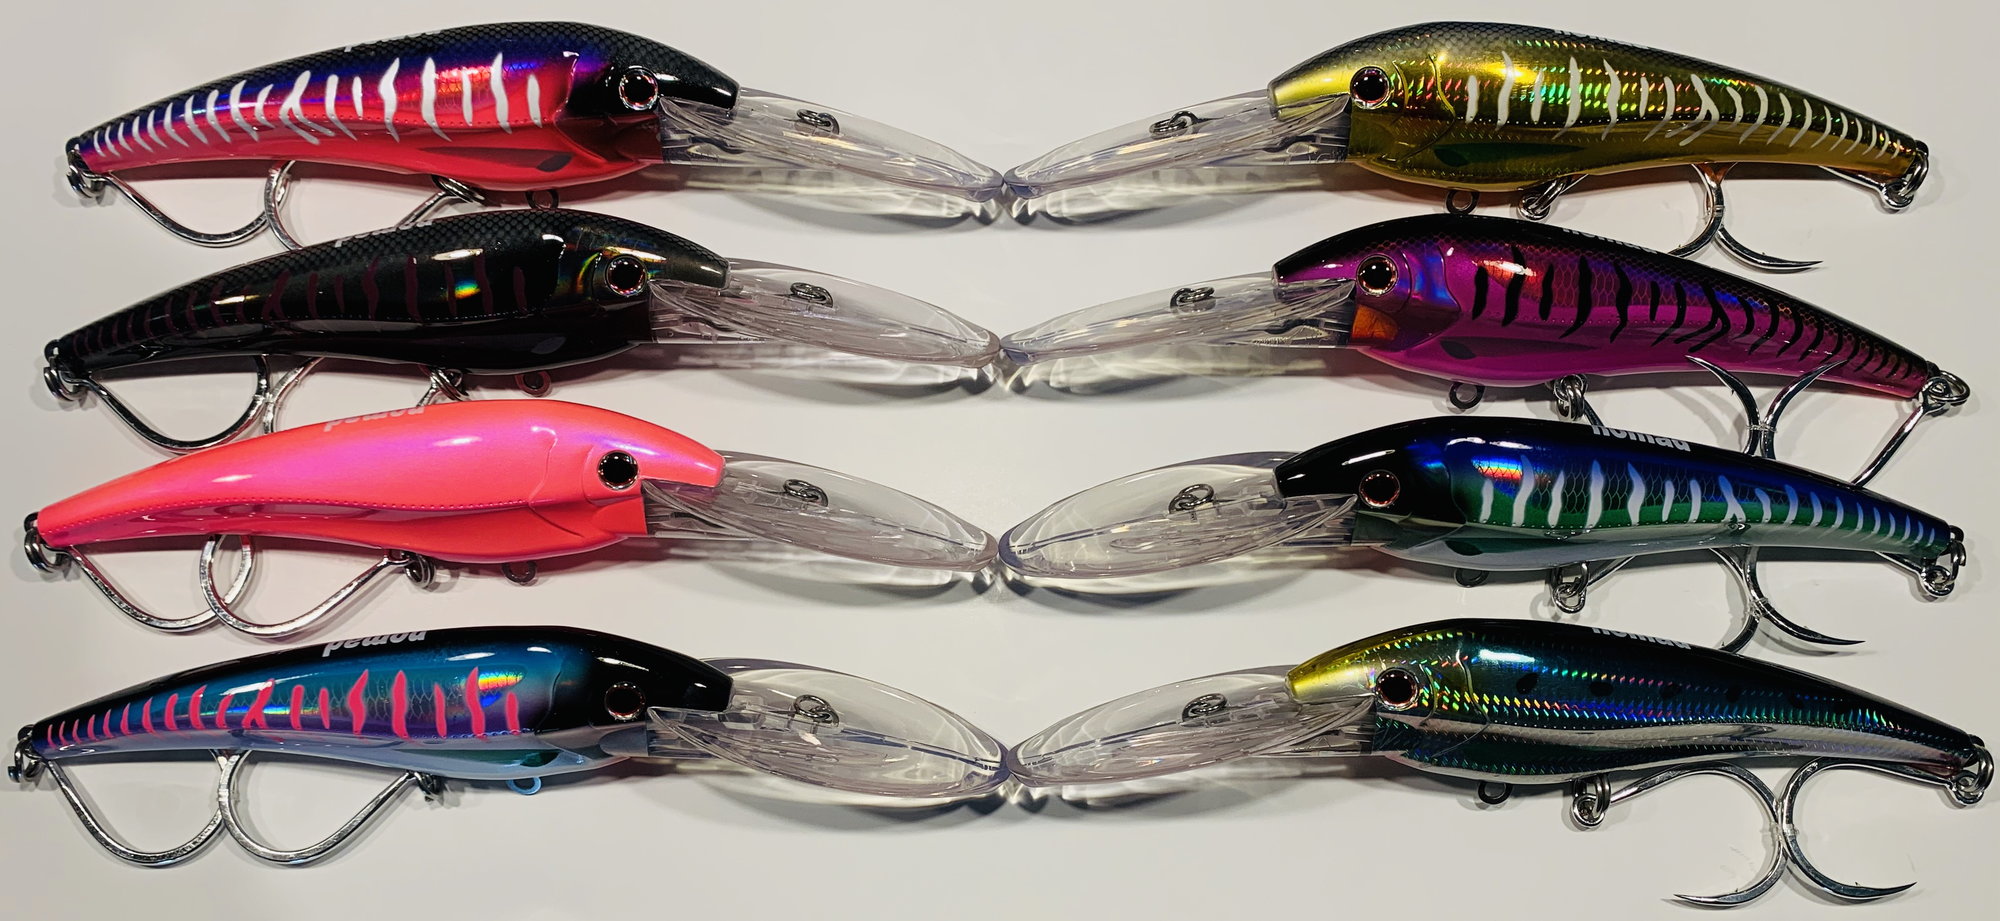 New Nomad DTX minnow colors!!!!!!!